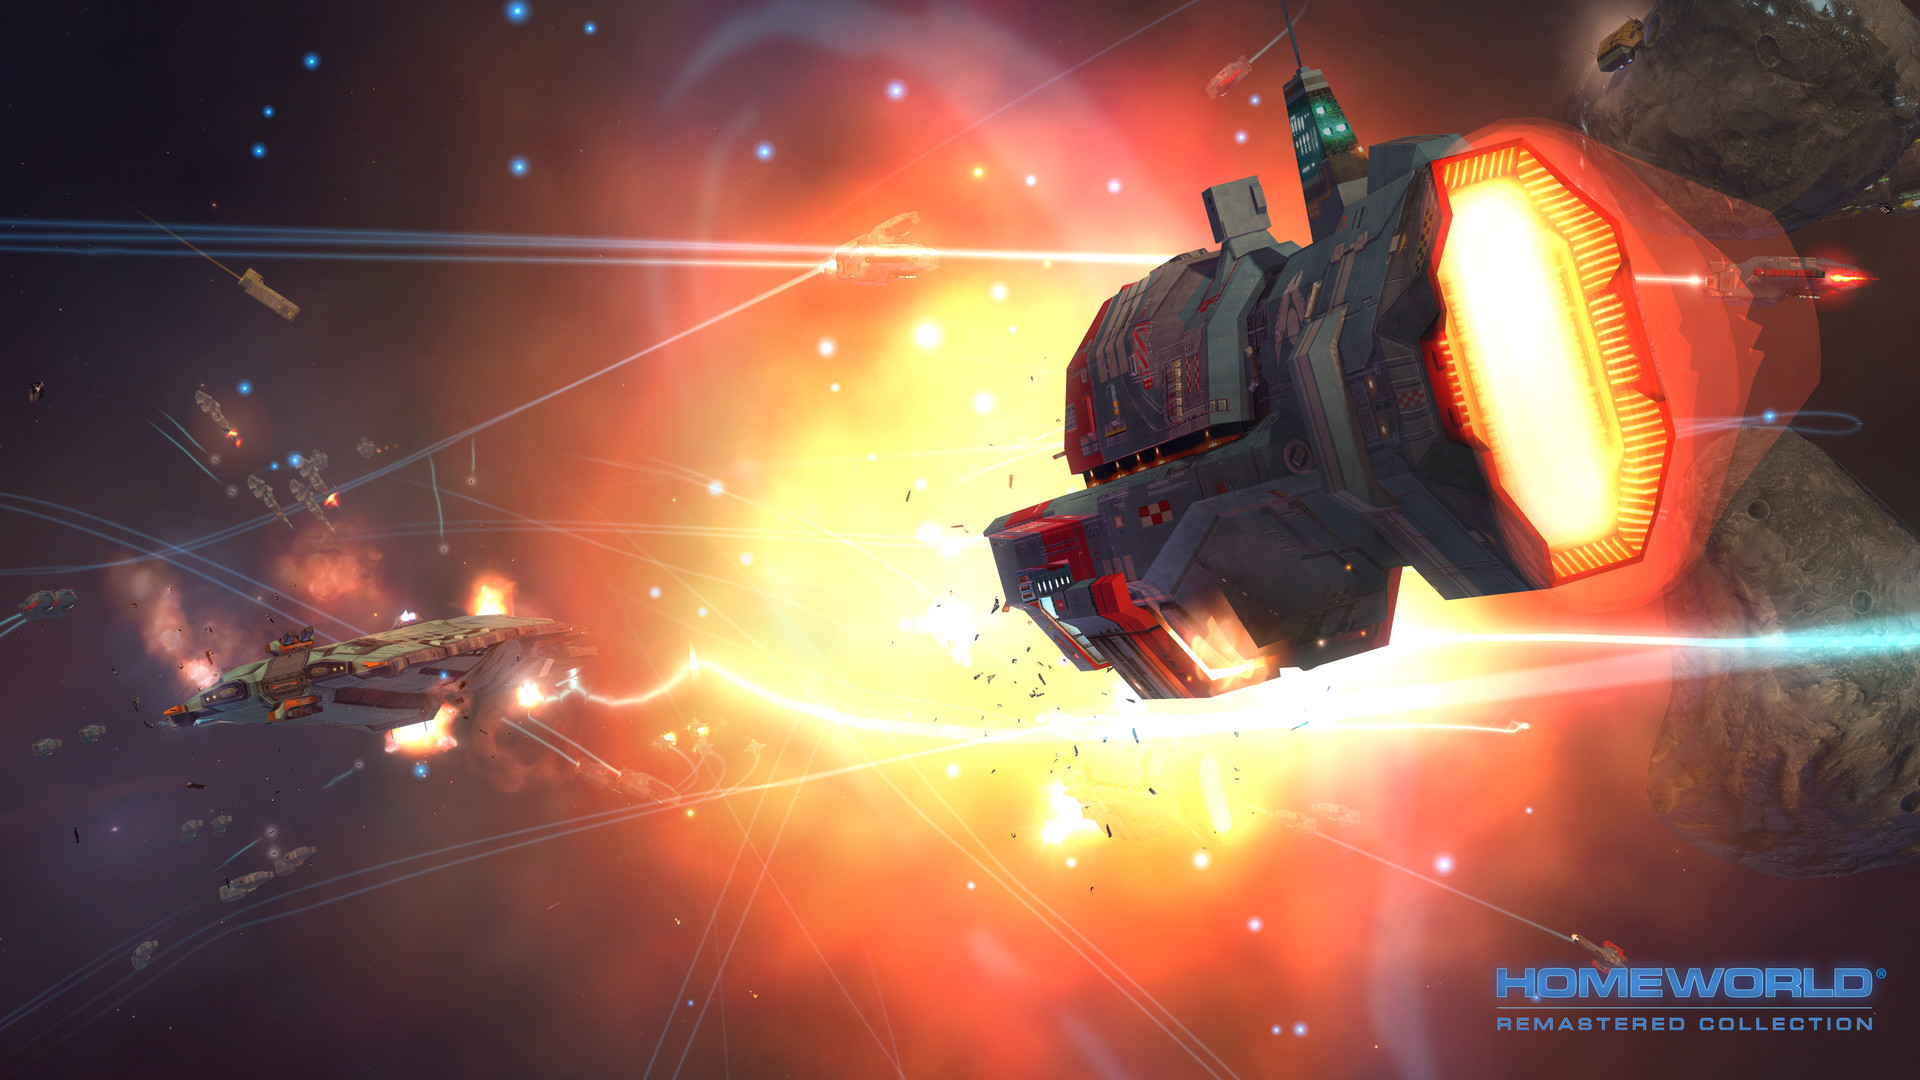 Homeworld Remastered Collection Images 